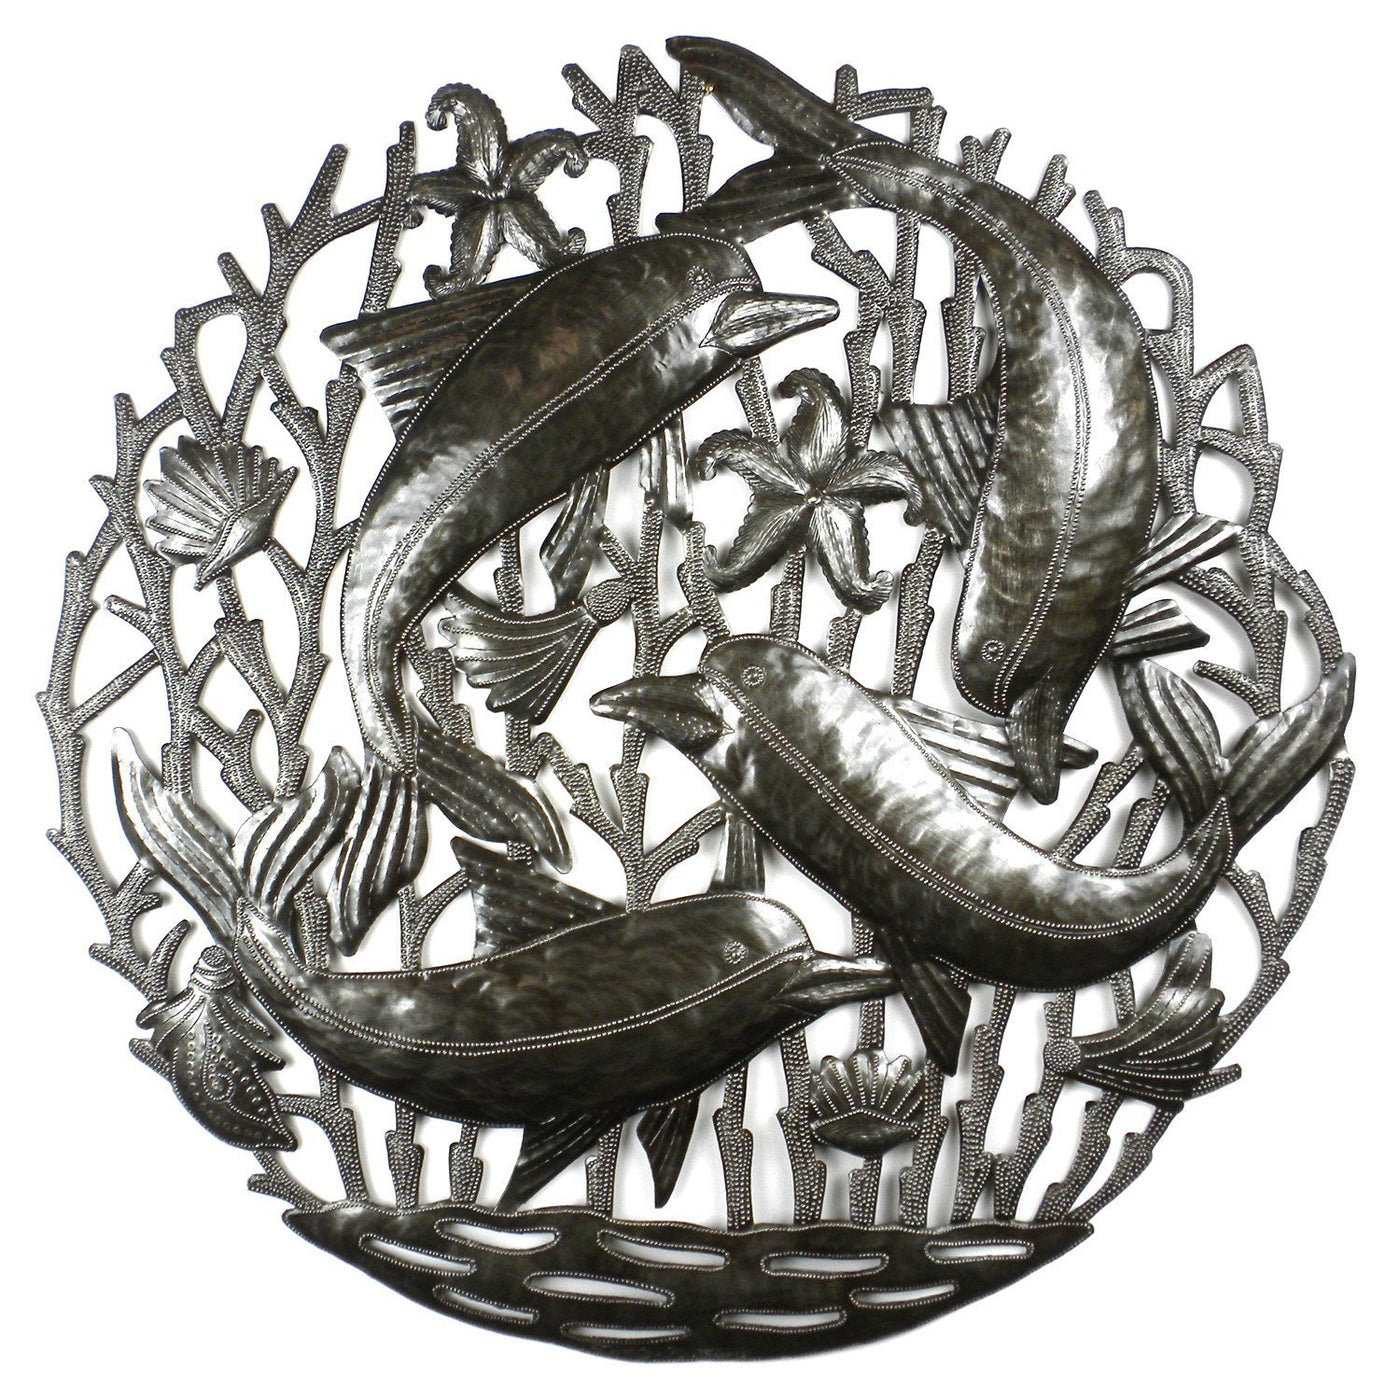 Pod of Dolphins Metal Wall Art - Croix des Bouquets - Yvonne’s 100th Wish Inc